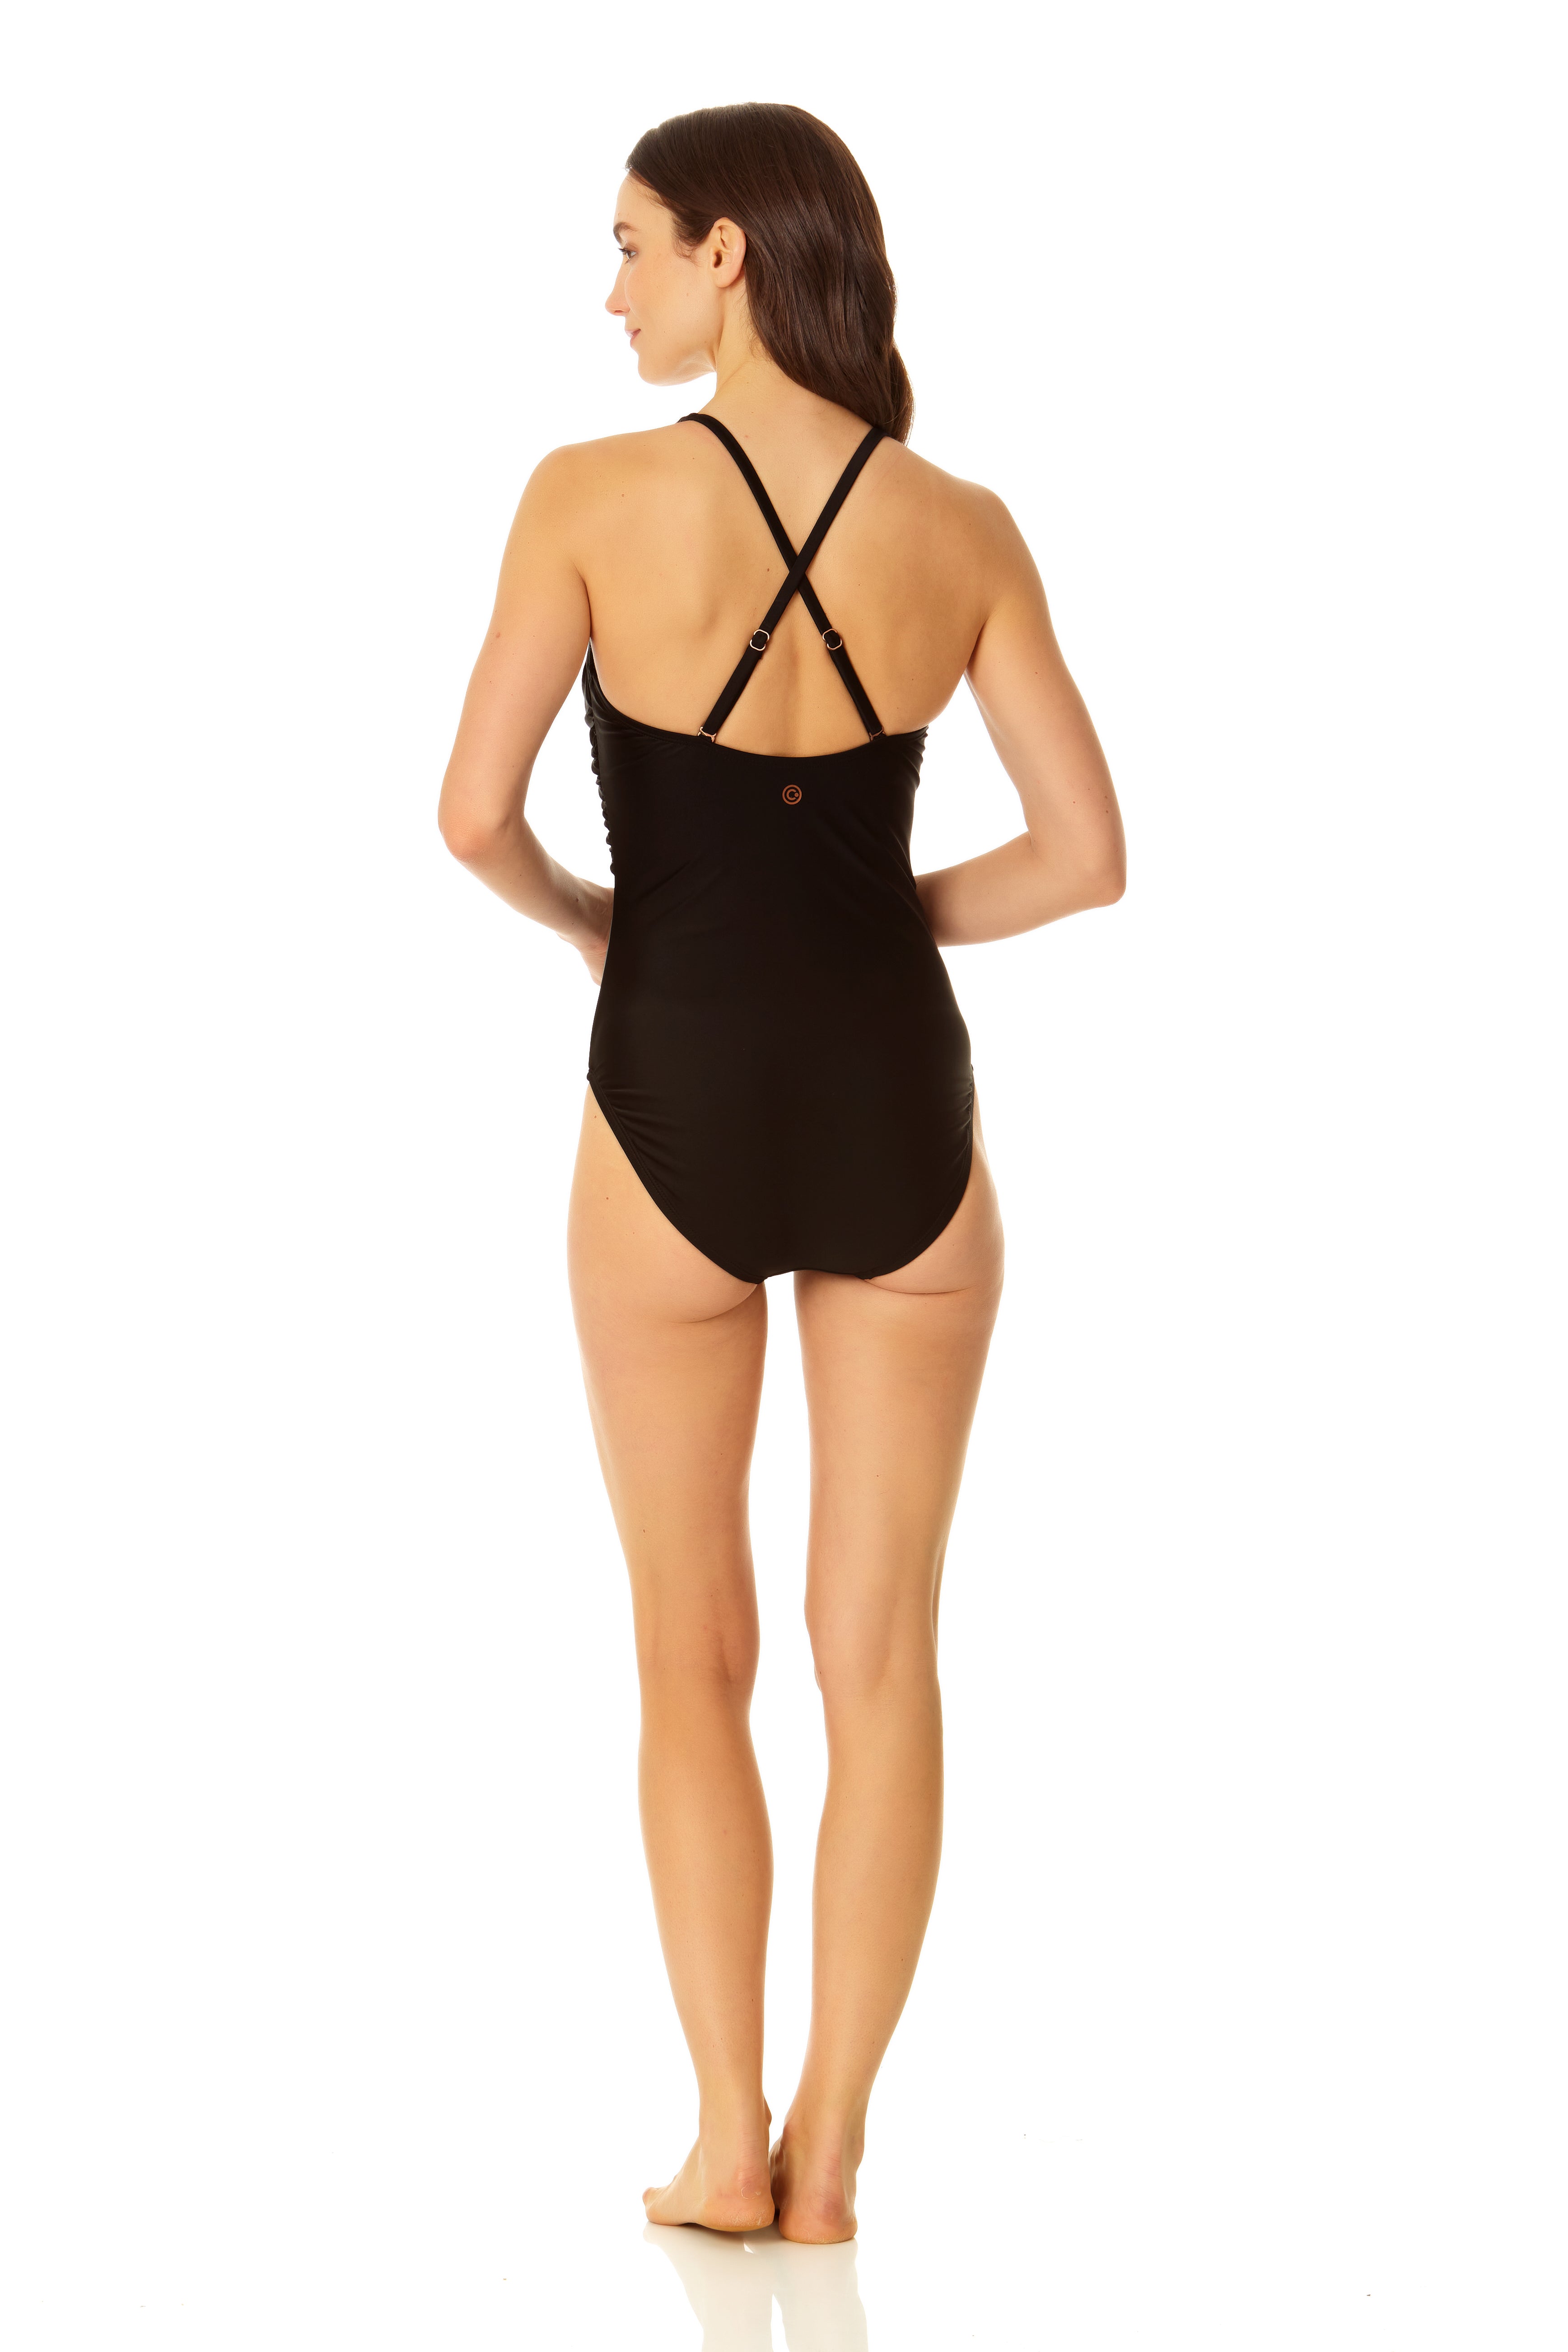 Women's Cross Front One Piece Swimsuit with Tummy Control